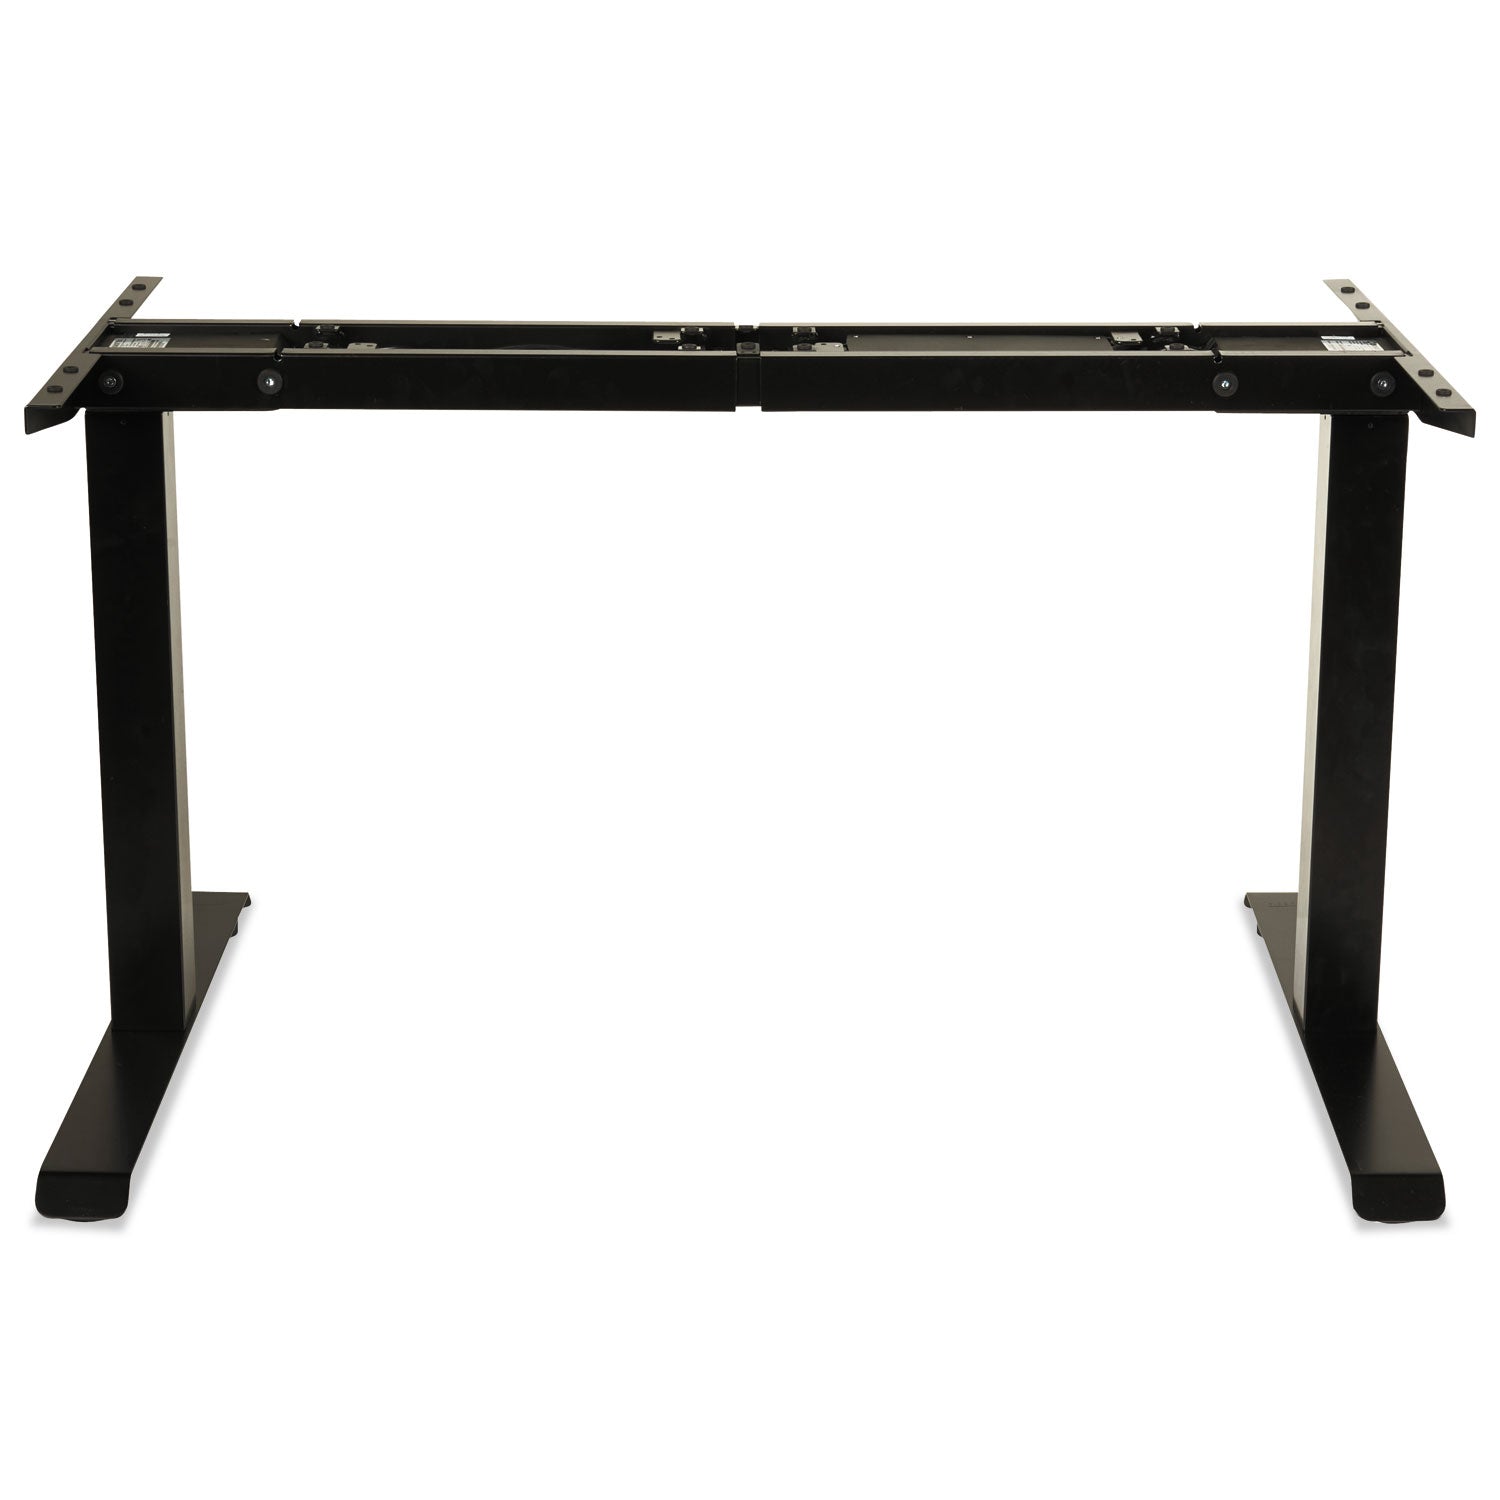 adaptivergo-sit-stand-two-stage-electric-height-adjustable-table-base-4806-x-2435-x-275-to-472-black_aleht2ssb - 3